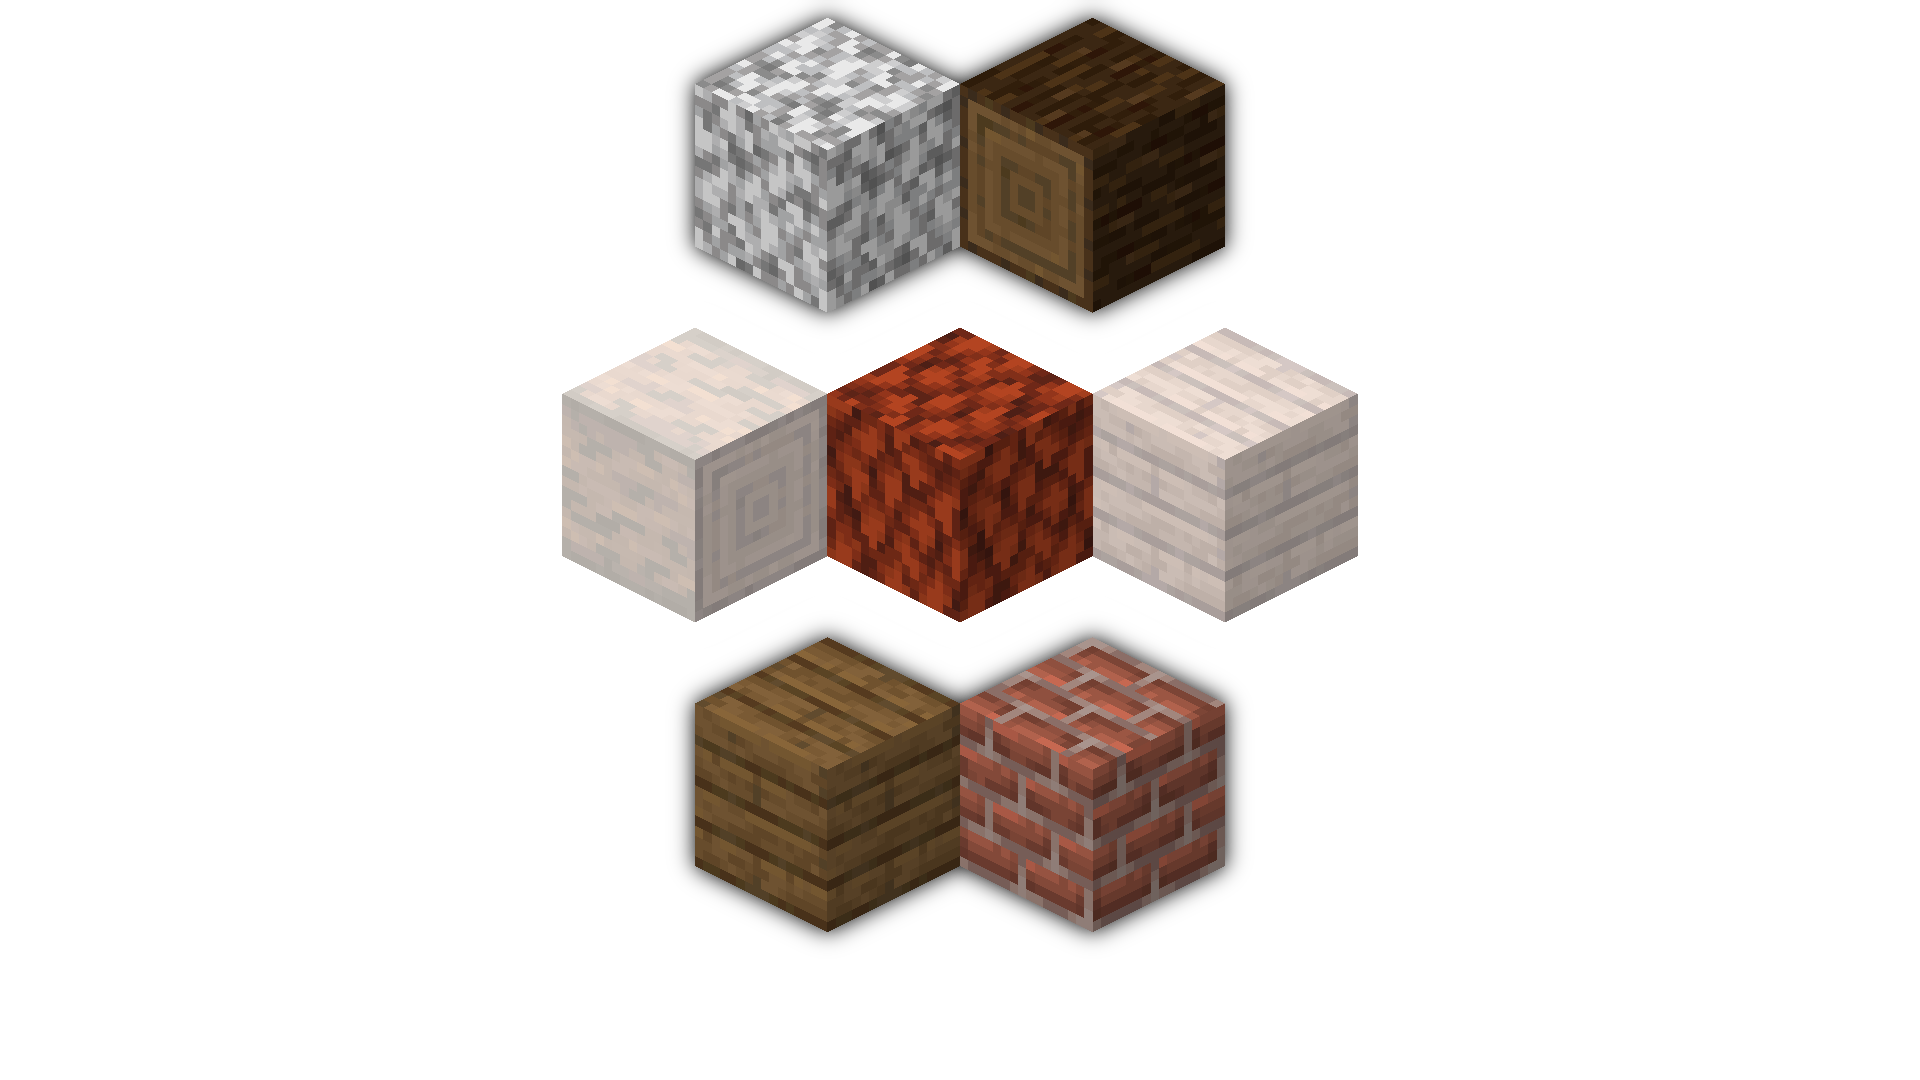 Showcasing the versatility of the blocks in 3 rows: (top) Diorite & Spruce Log, (middle) Stripped Pine Log, Pine Wood & Pine Planks, (bottom) Spruce Planks & Bricks